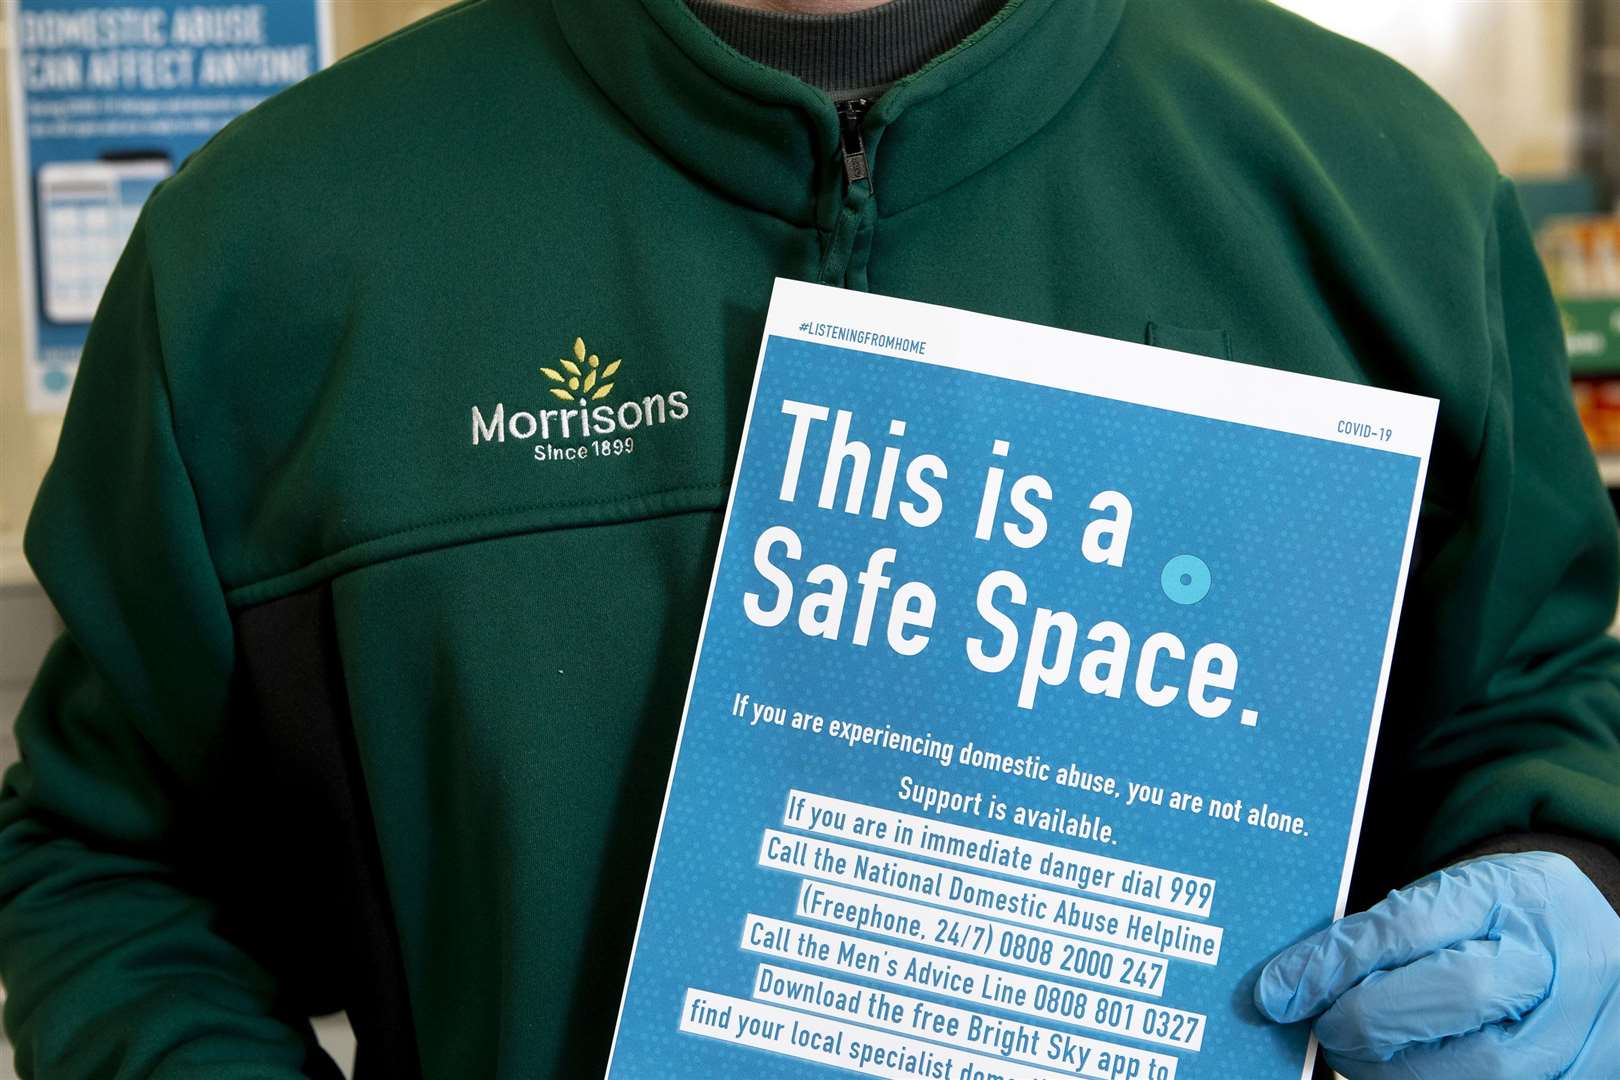 Pharmacies at three Morrisons stores in Kent will offer a safe space where victims of domestic abuse can access support services